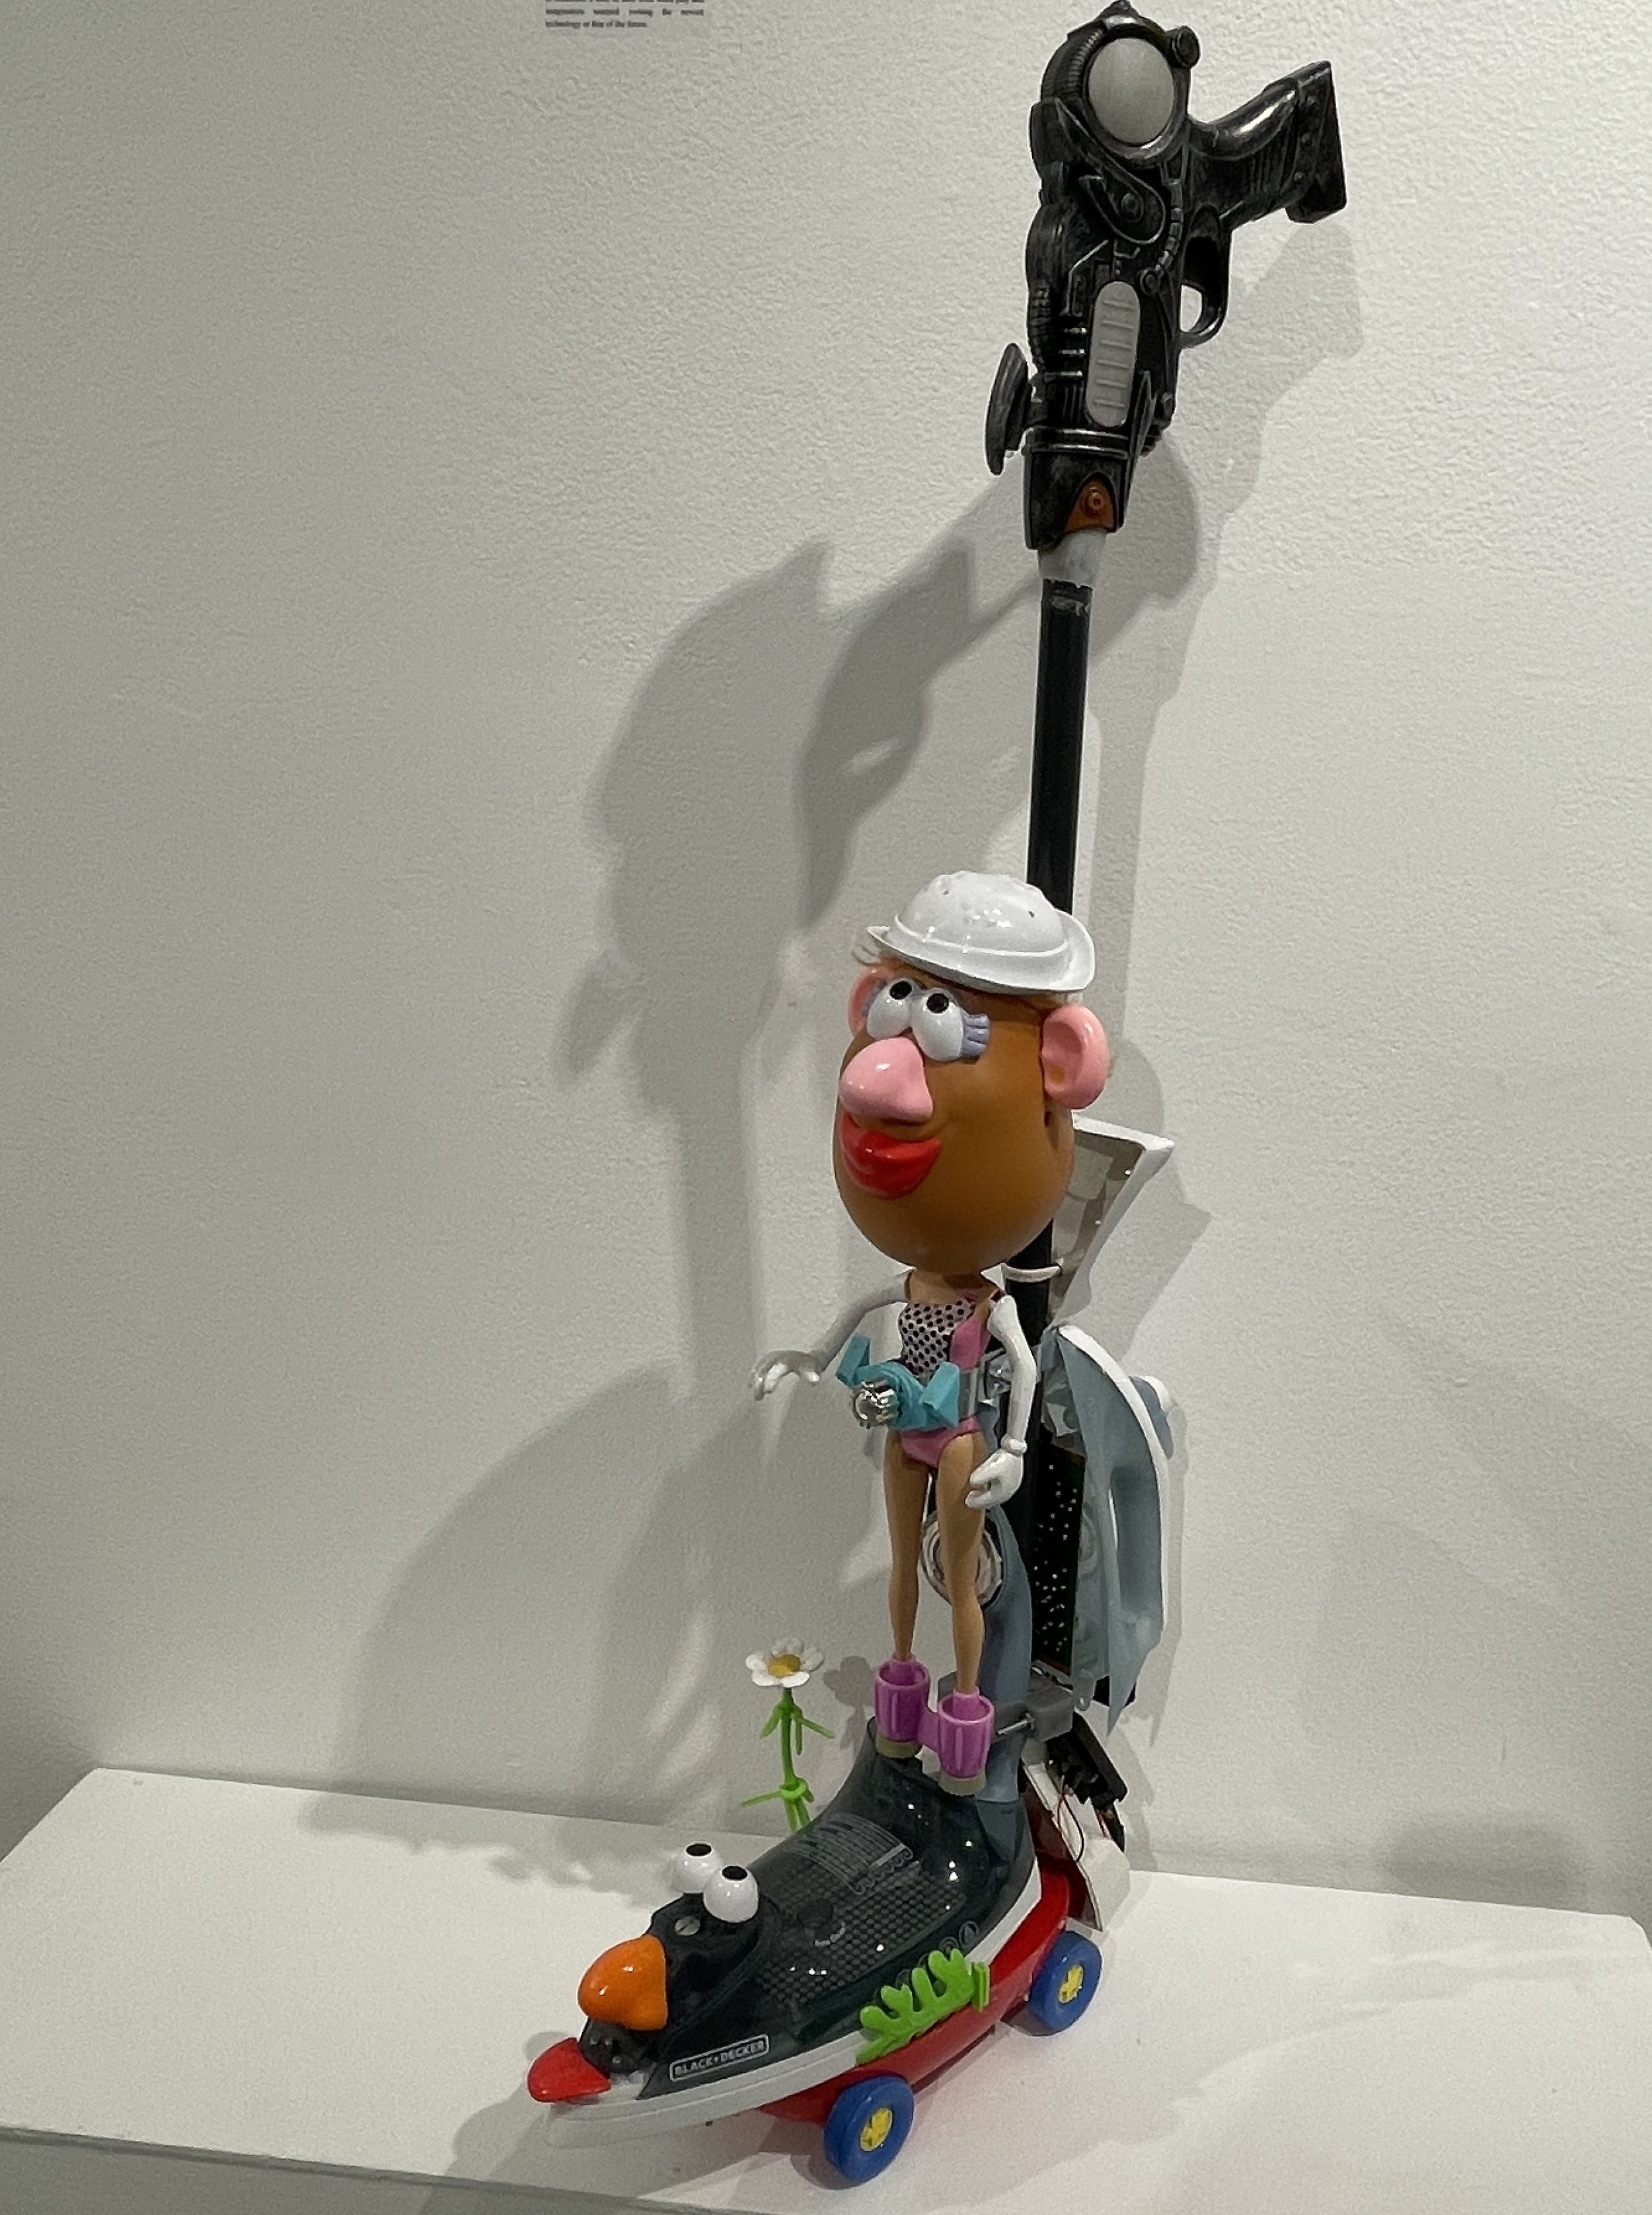  Rachel Green, GA   Barbie Potato Head   Walking cane, toys, Iron, arduino, sound board, and led panel  $1,500.00  2020  &nbsp;  Barbie Potato Head is an interactive, mixed media sculpture that makes a playful comment on aging. She lights up and make